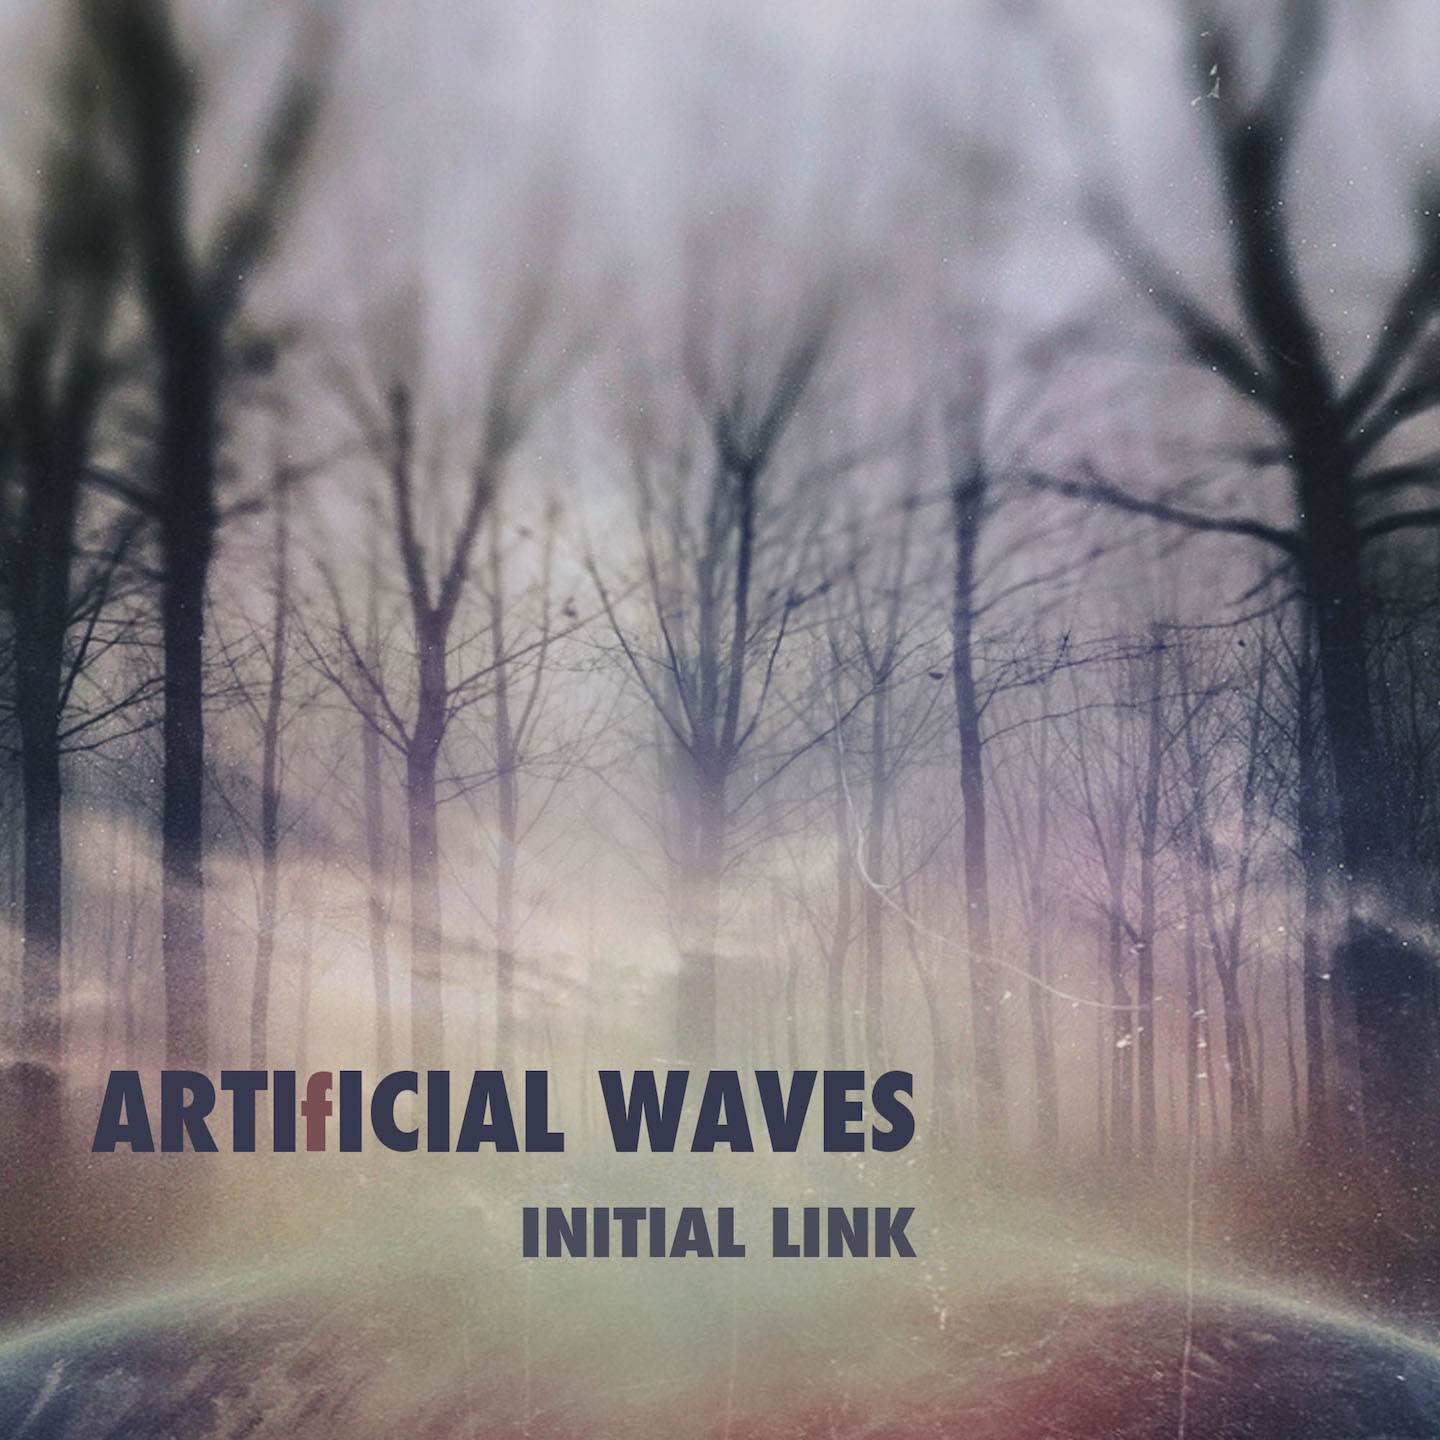 Remastered debut: Artificial Waves and “Initial Link”